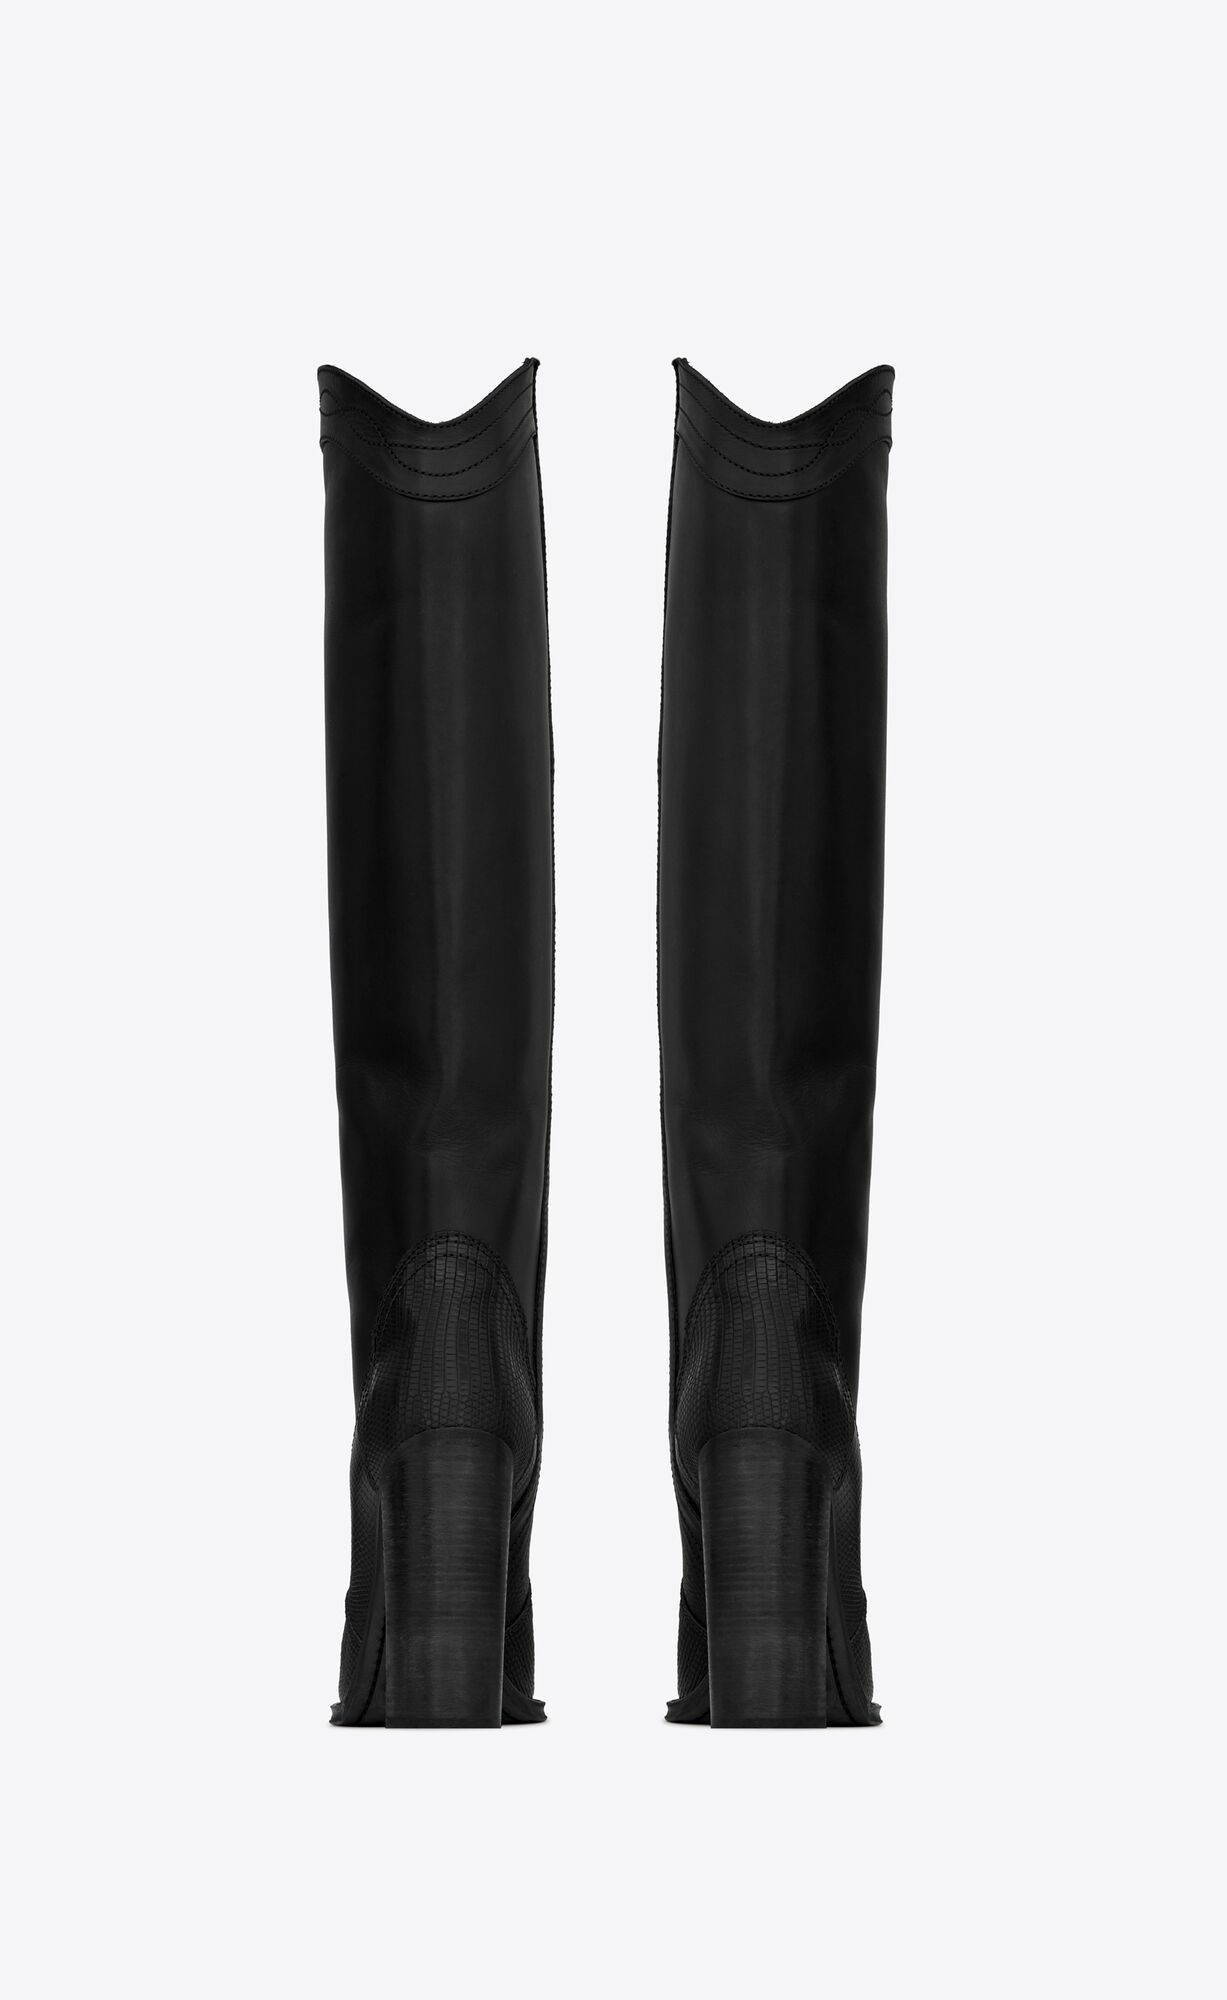 KATE high boots in tejus-embossed and smooth leather | Saint Laurent ...